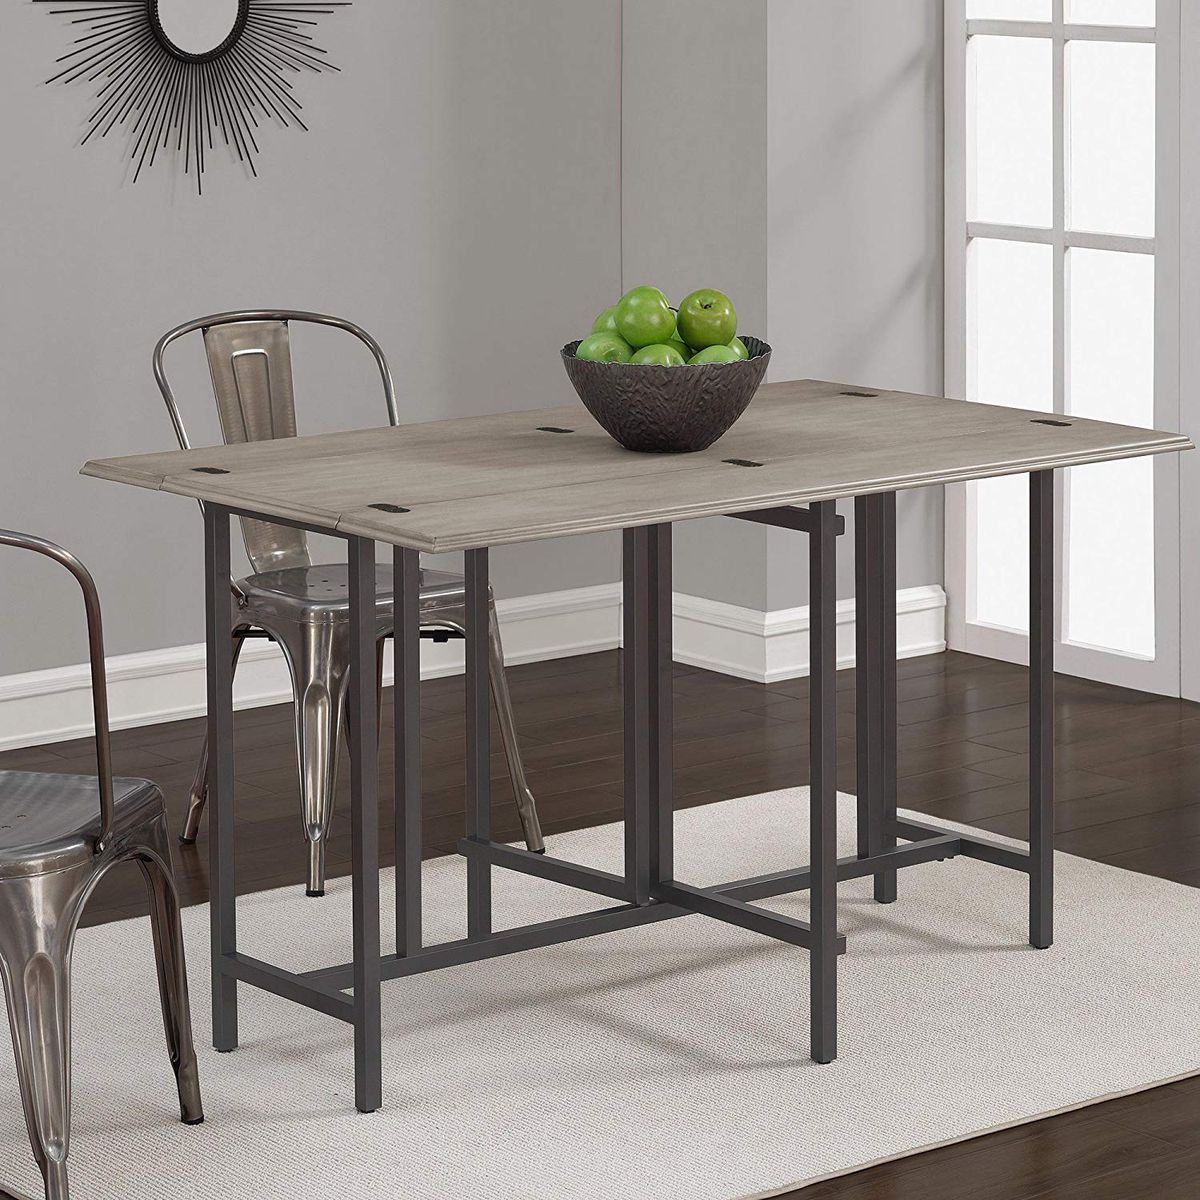 A compact dining room table has steel legs, a wooden gray top, and two metal chairs. All are sitting on a beige rug. 